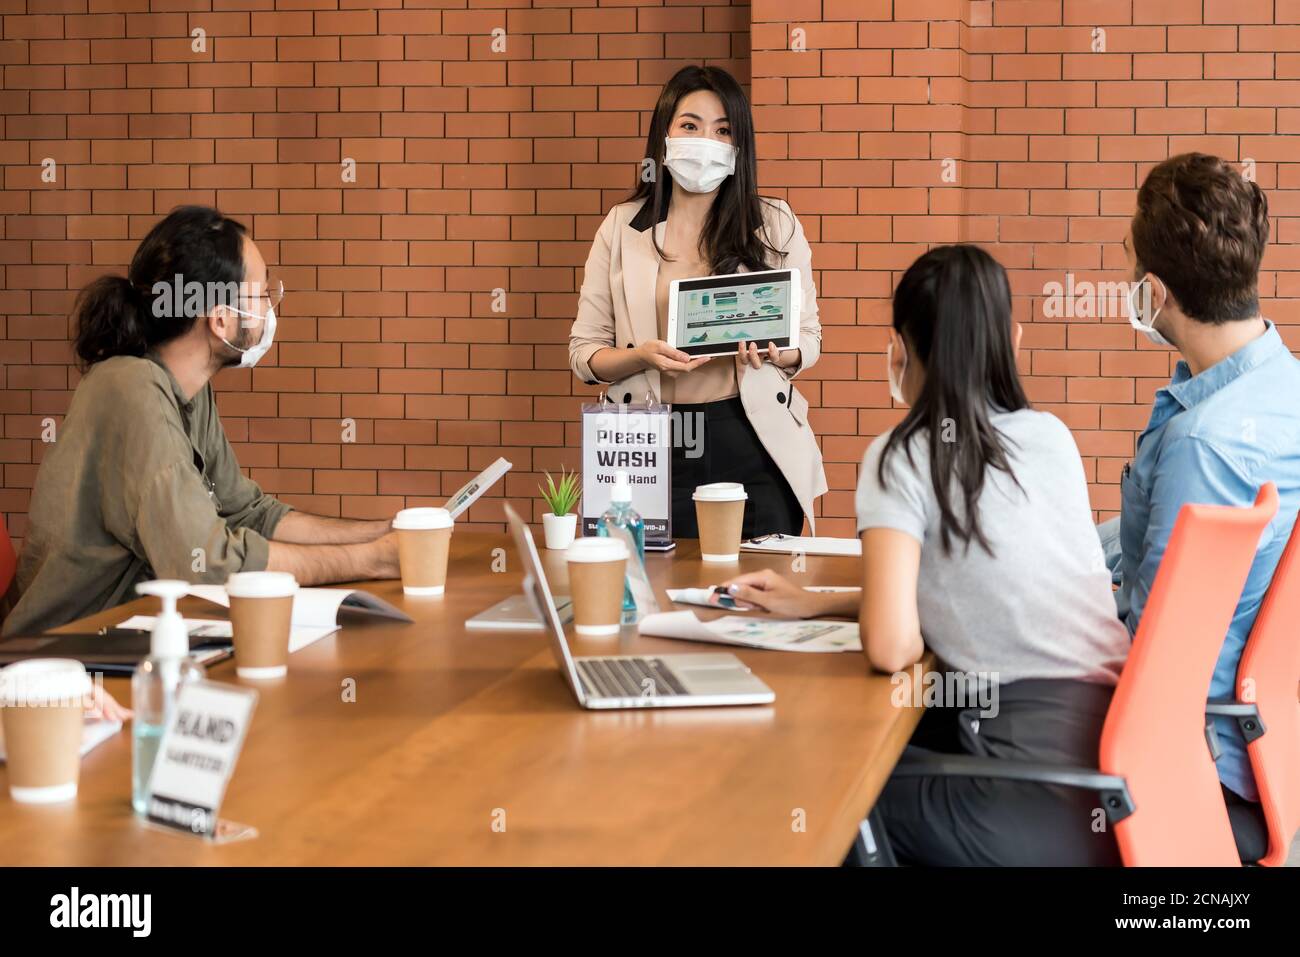 Businee person meeting with face mask. Stock Photo